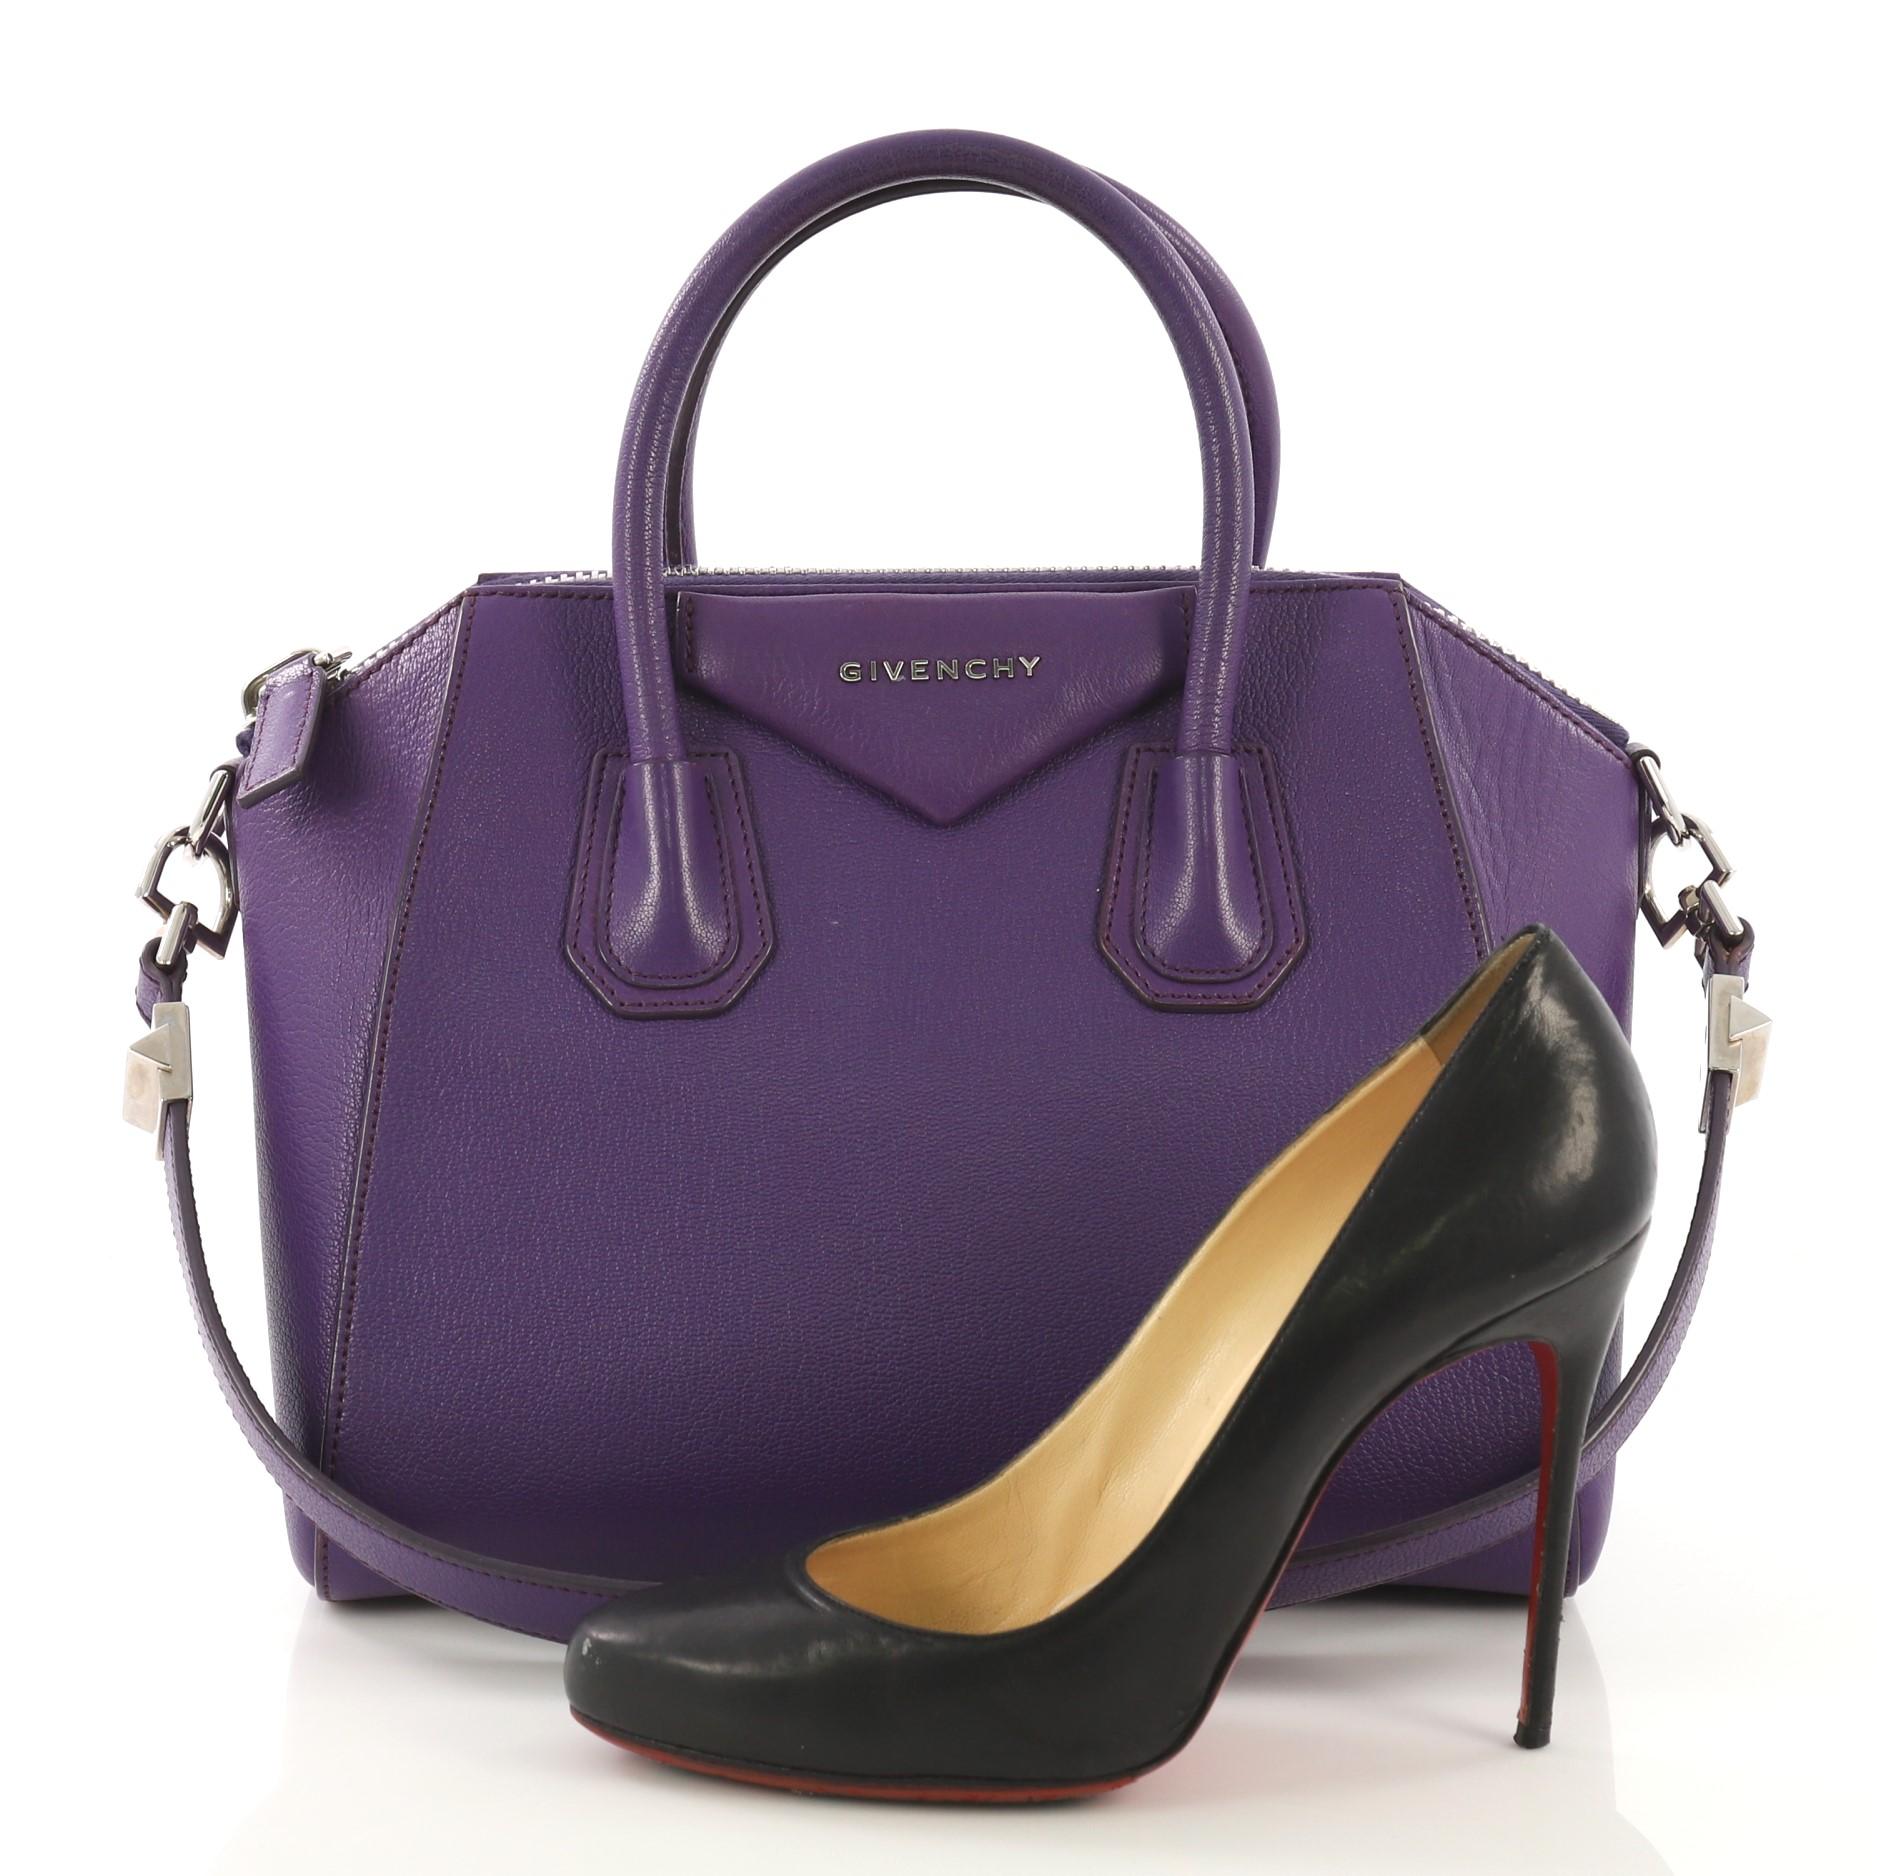 This Givenchy Antigona Bag Leather Small, crafted from purple leather, features dual rolled leather handles and silver-tone hardware. Its zip-around closure opens to a beige fabric interior with zip and slip pockets. **Note: Shoe photographed is